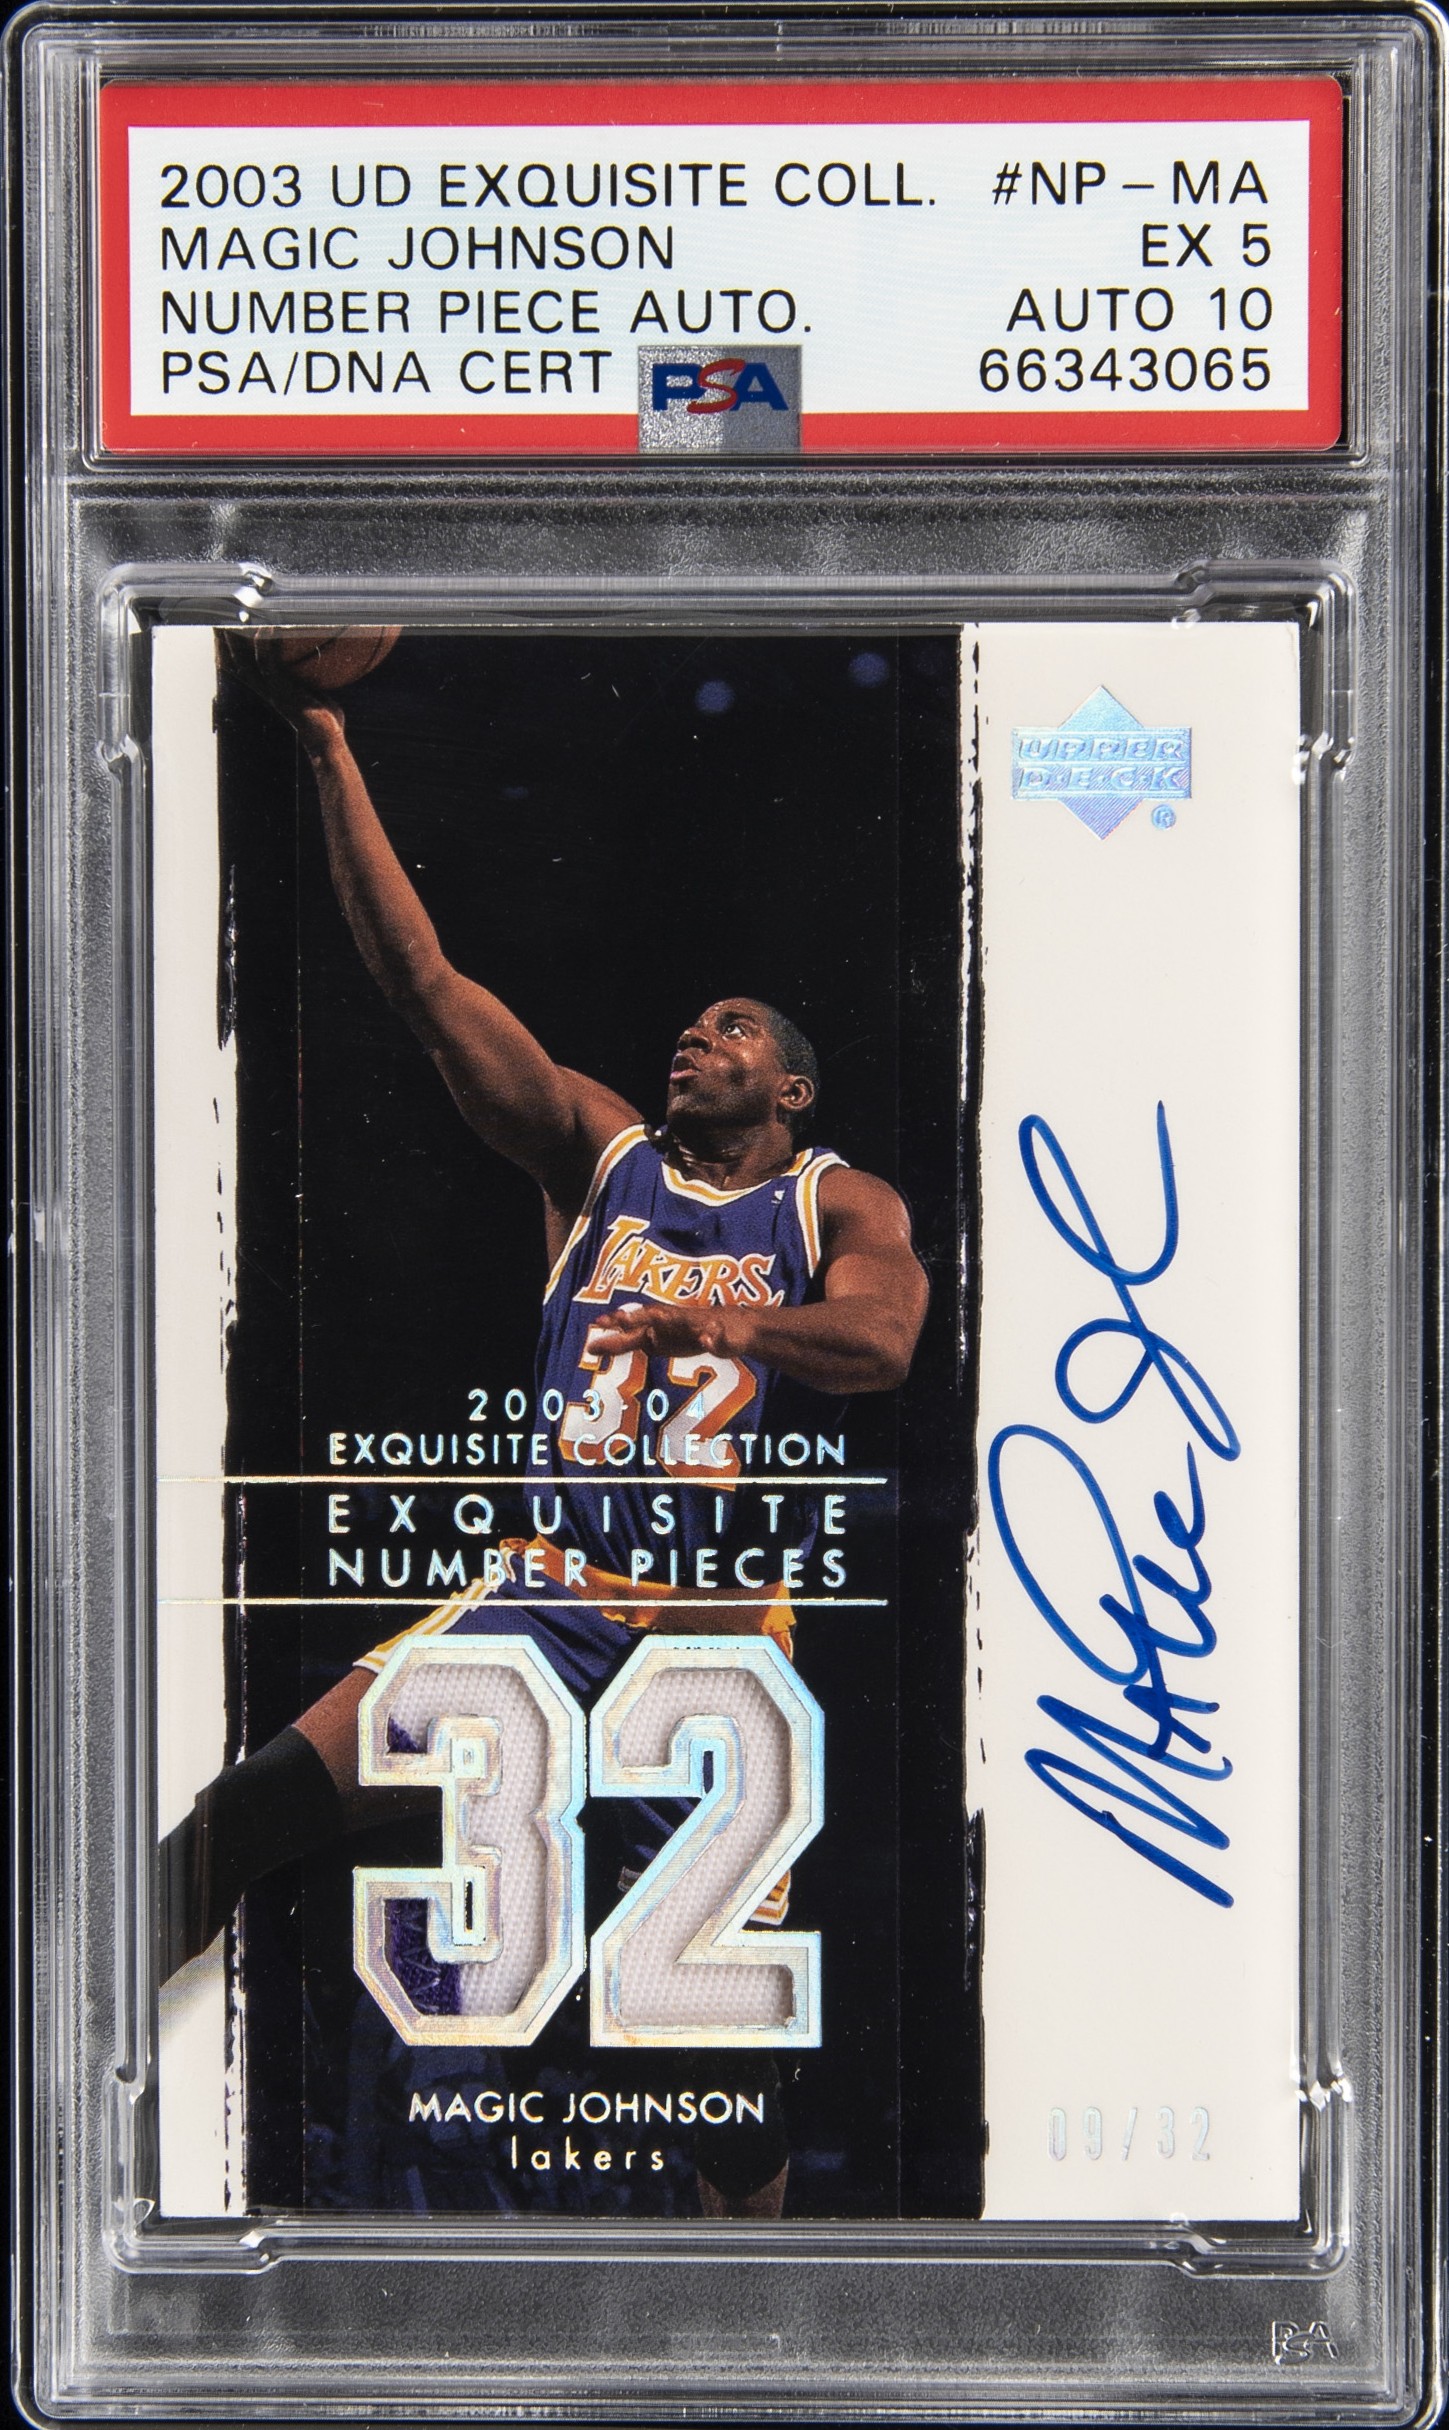 2003-04 UD Exquisite Collection Number Piece Autographs #NP-MA Magic Johnson Signed Game-Used Patch Card (#09/32) – PSA EX 5, PSA/DNA GEM MT 10